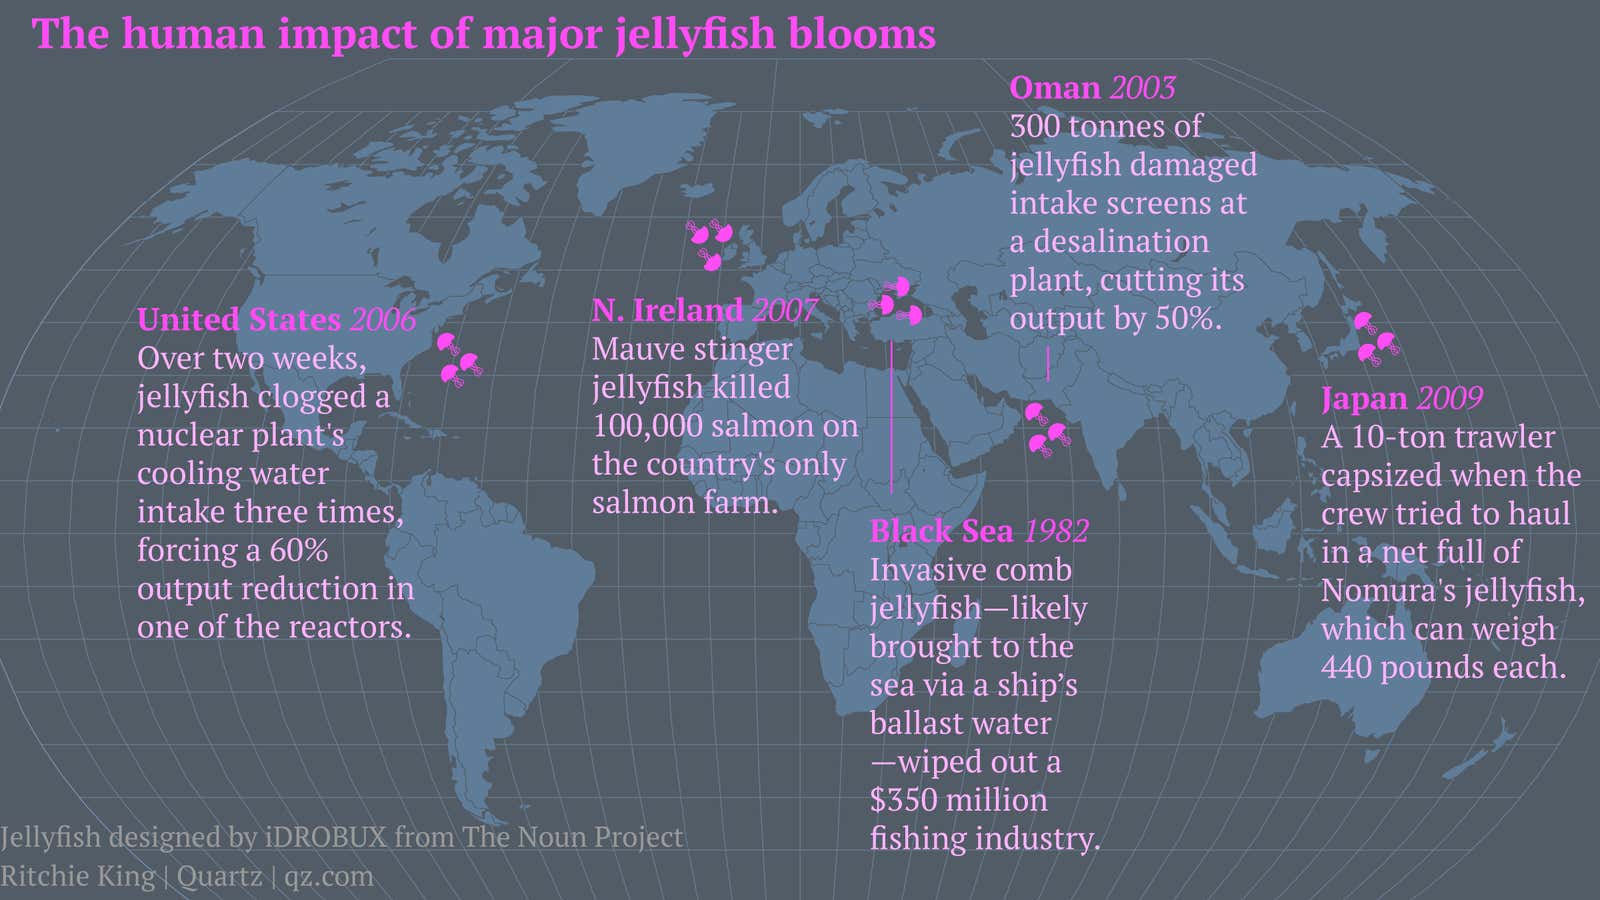 Jellyfish are taking over the seas, and it might be too late to stop them